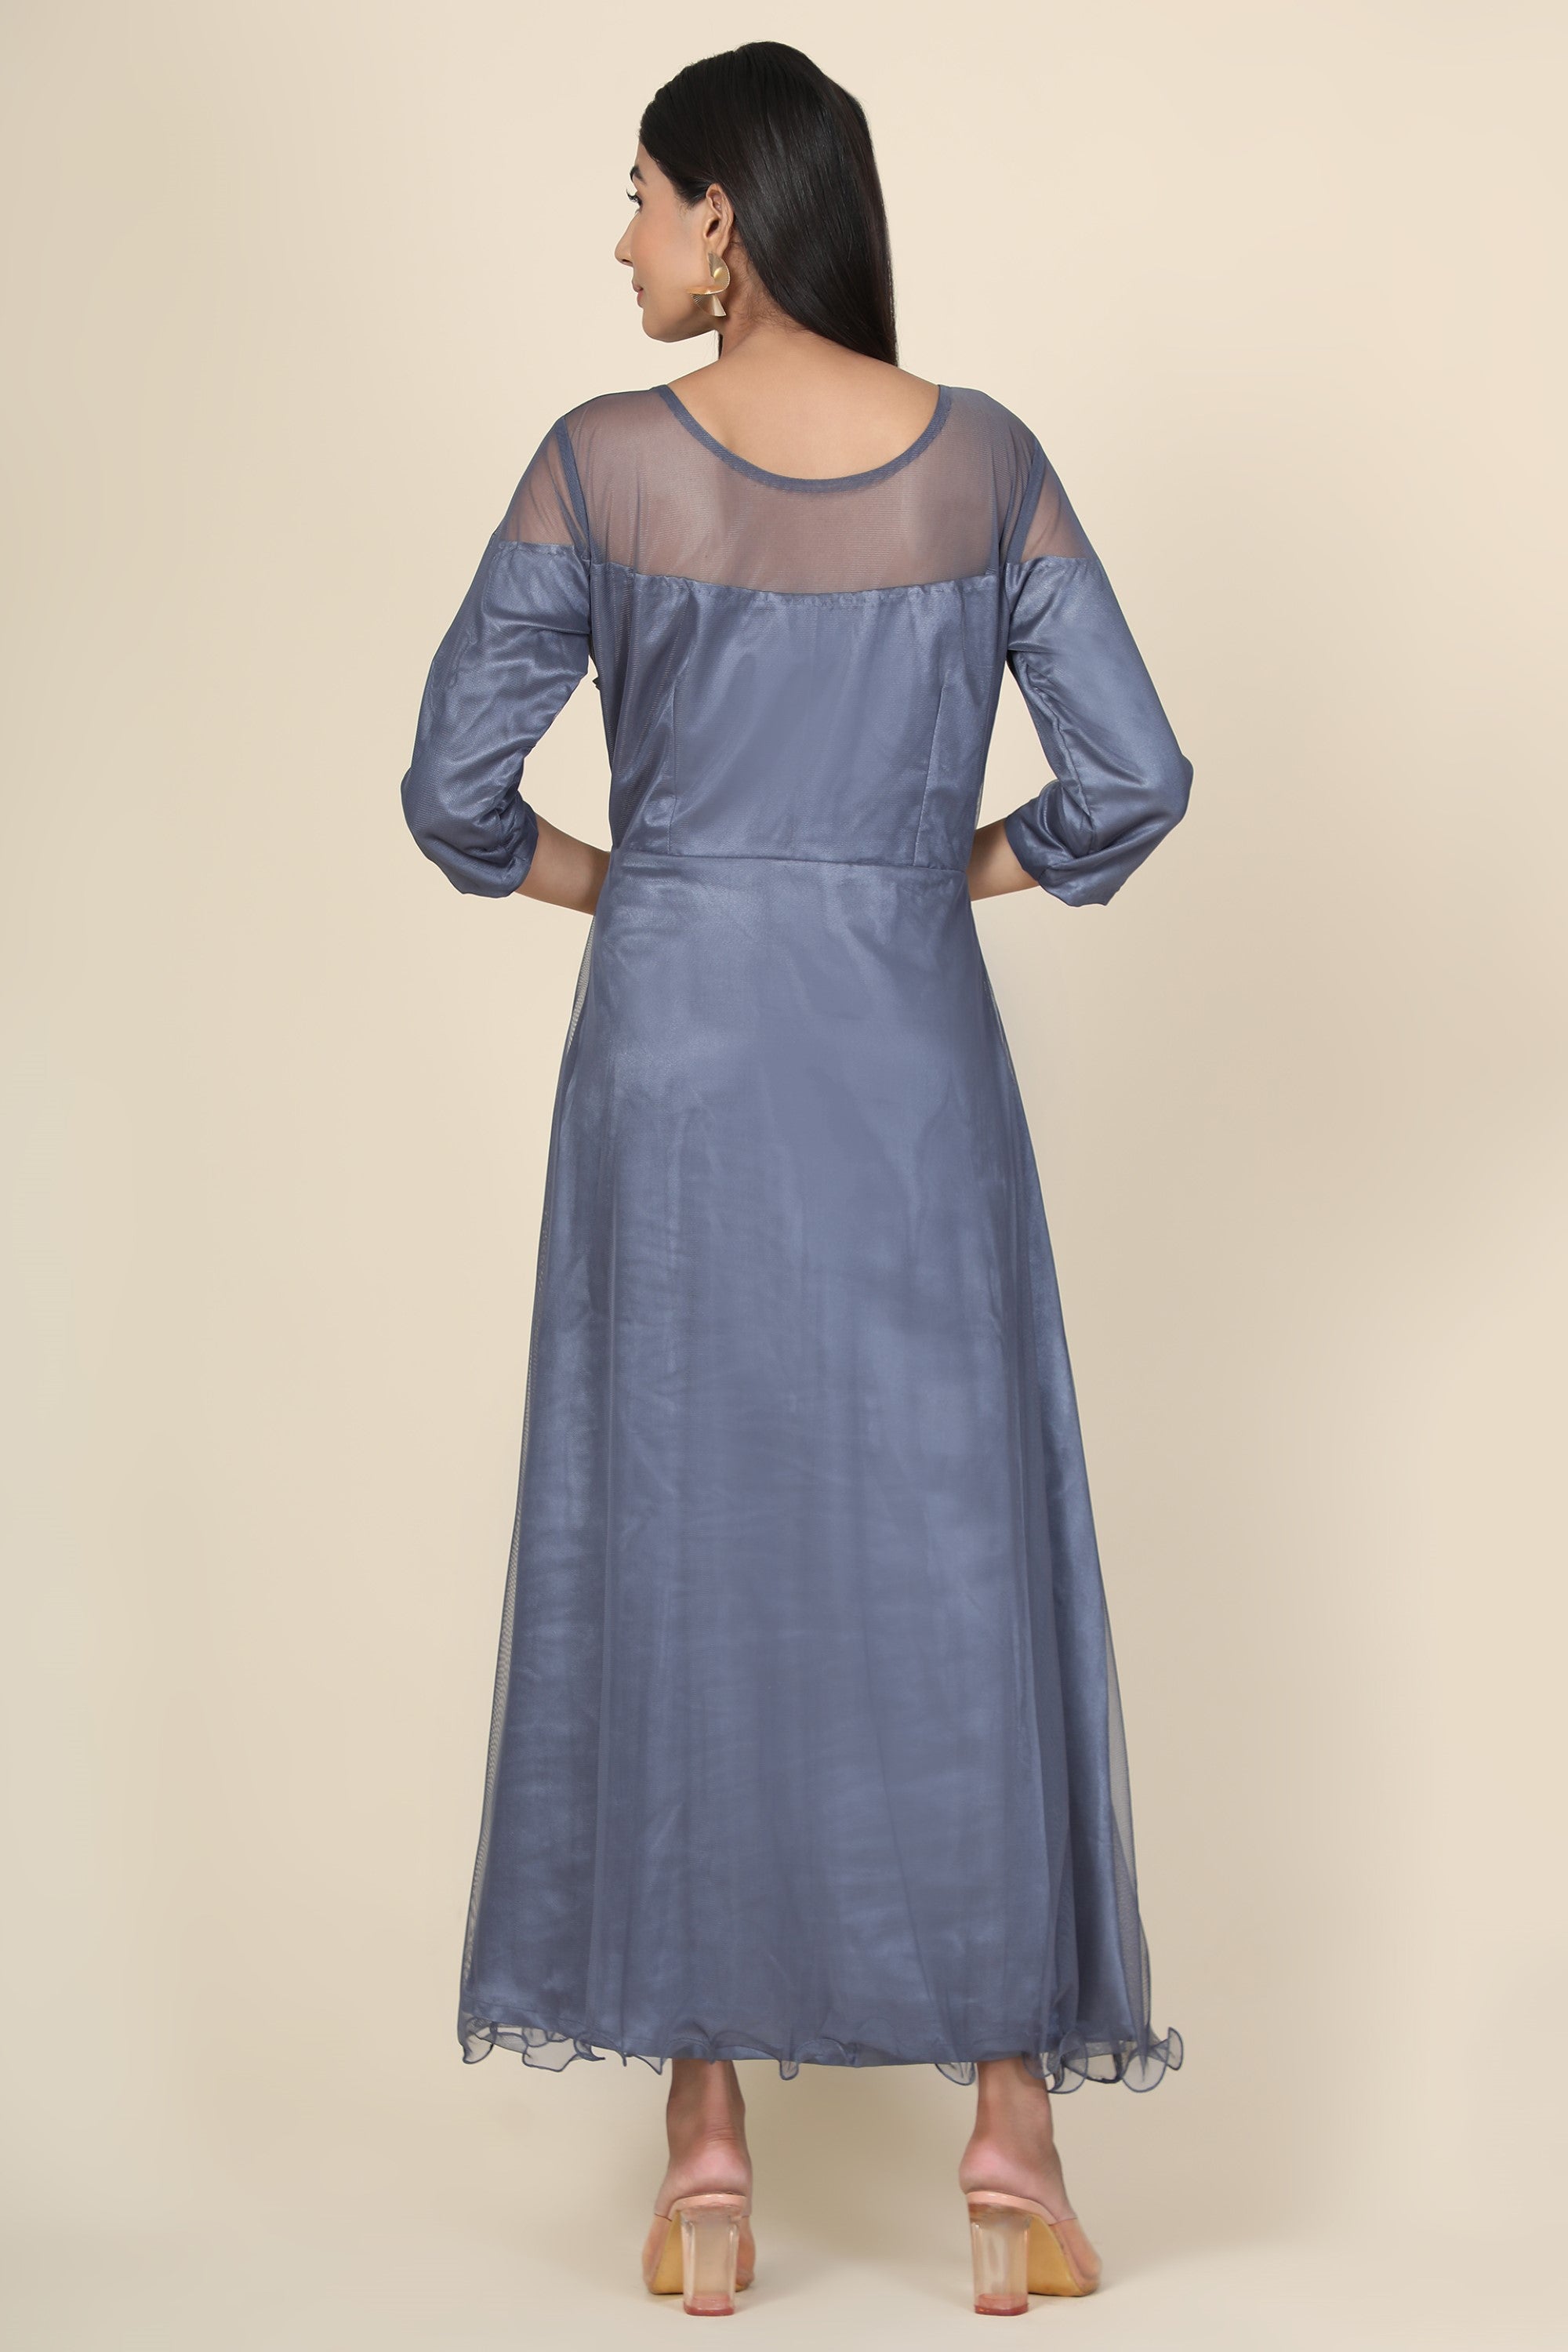 Women's Pleat Draped Grey Gown - MIRACOLOS by Ruchi